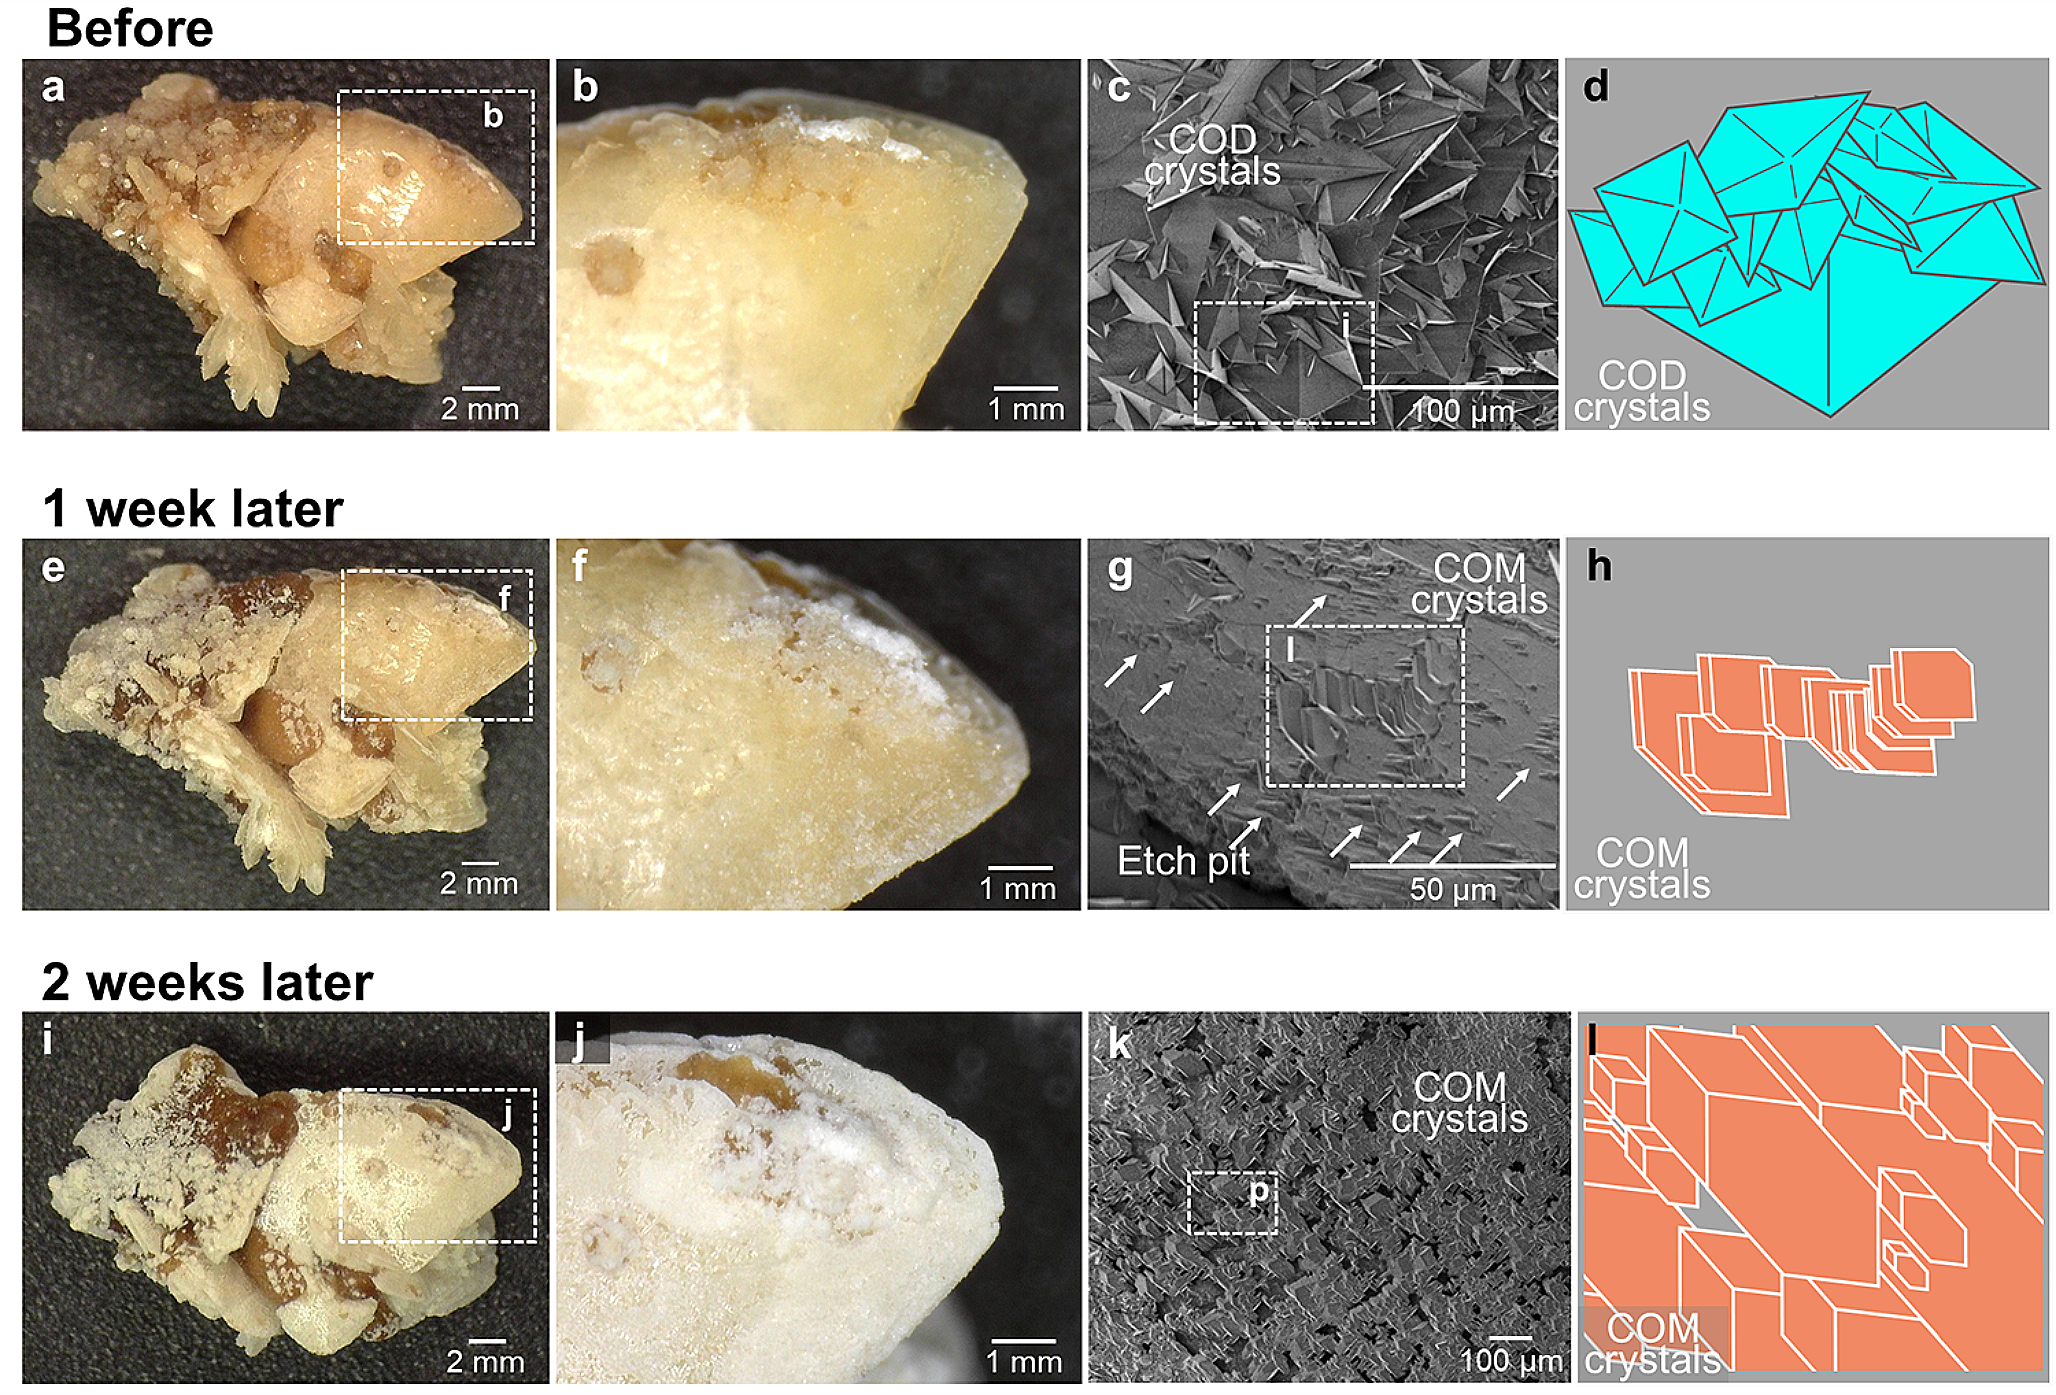 The impact of crystal phase transition on the hardness and structure of kidney stones